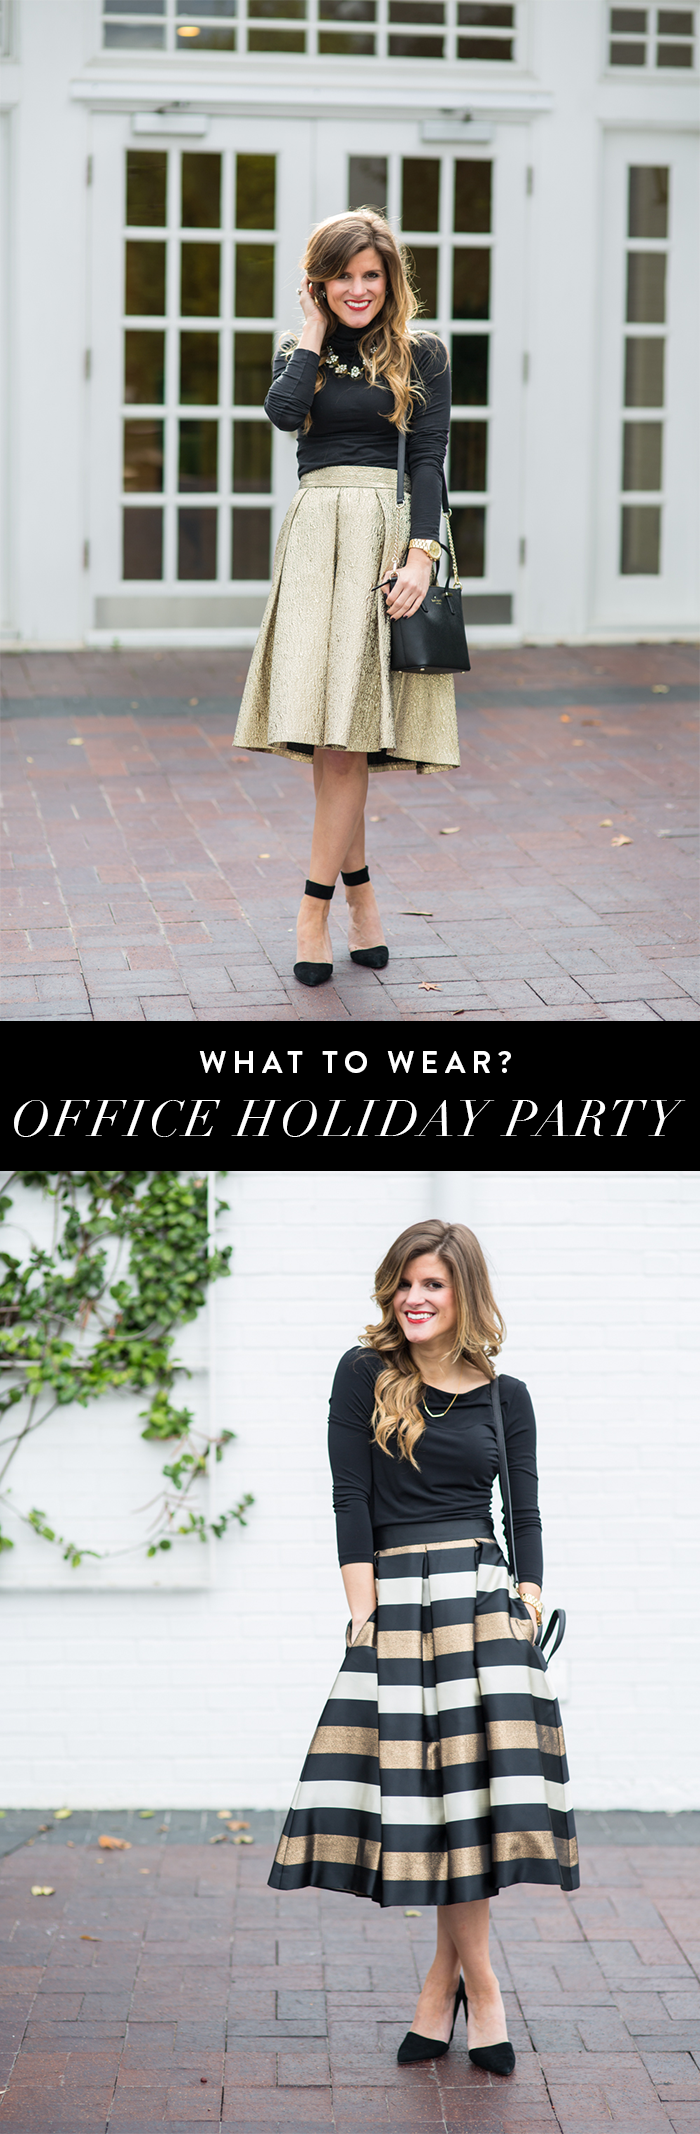 what to wear to holiday office party, holiday office party outfit idea, what to wear to company christmas party, midi skirt outfit, eliza j midi skirt with black turtleneck, kate spade bag, statement necklace